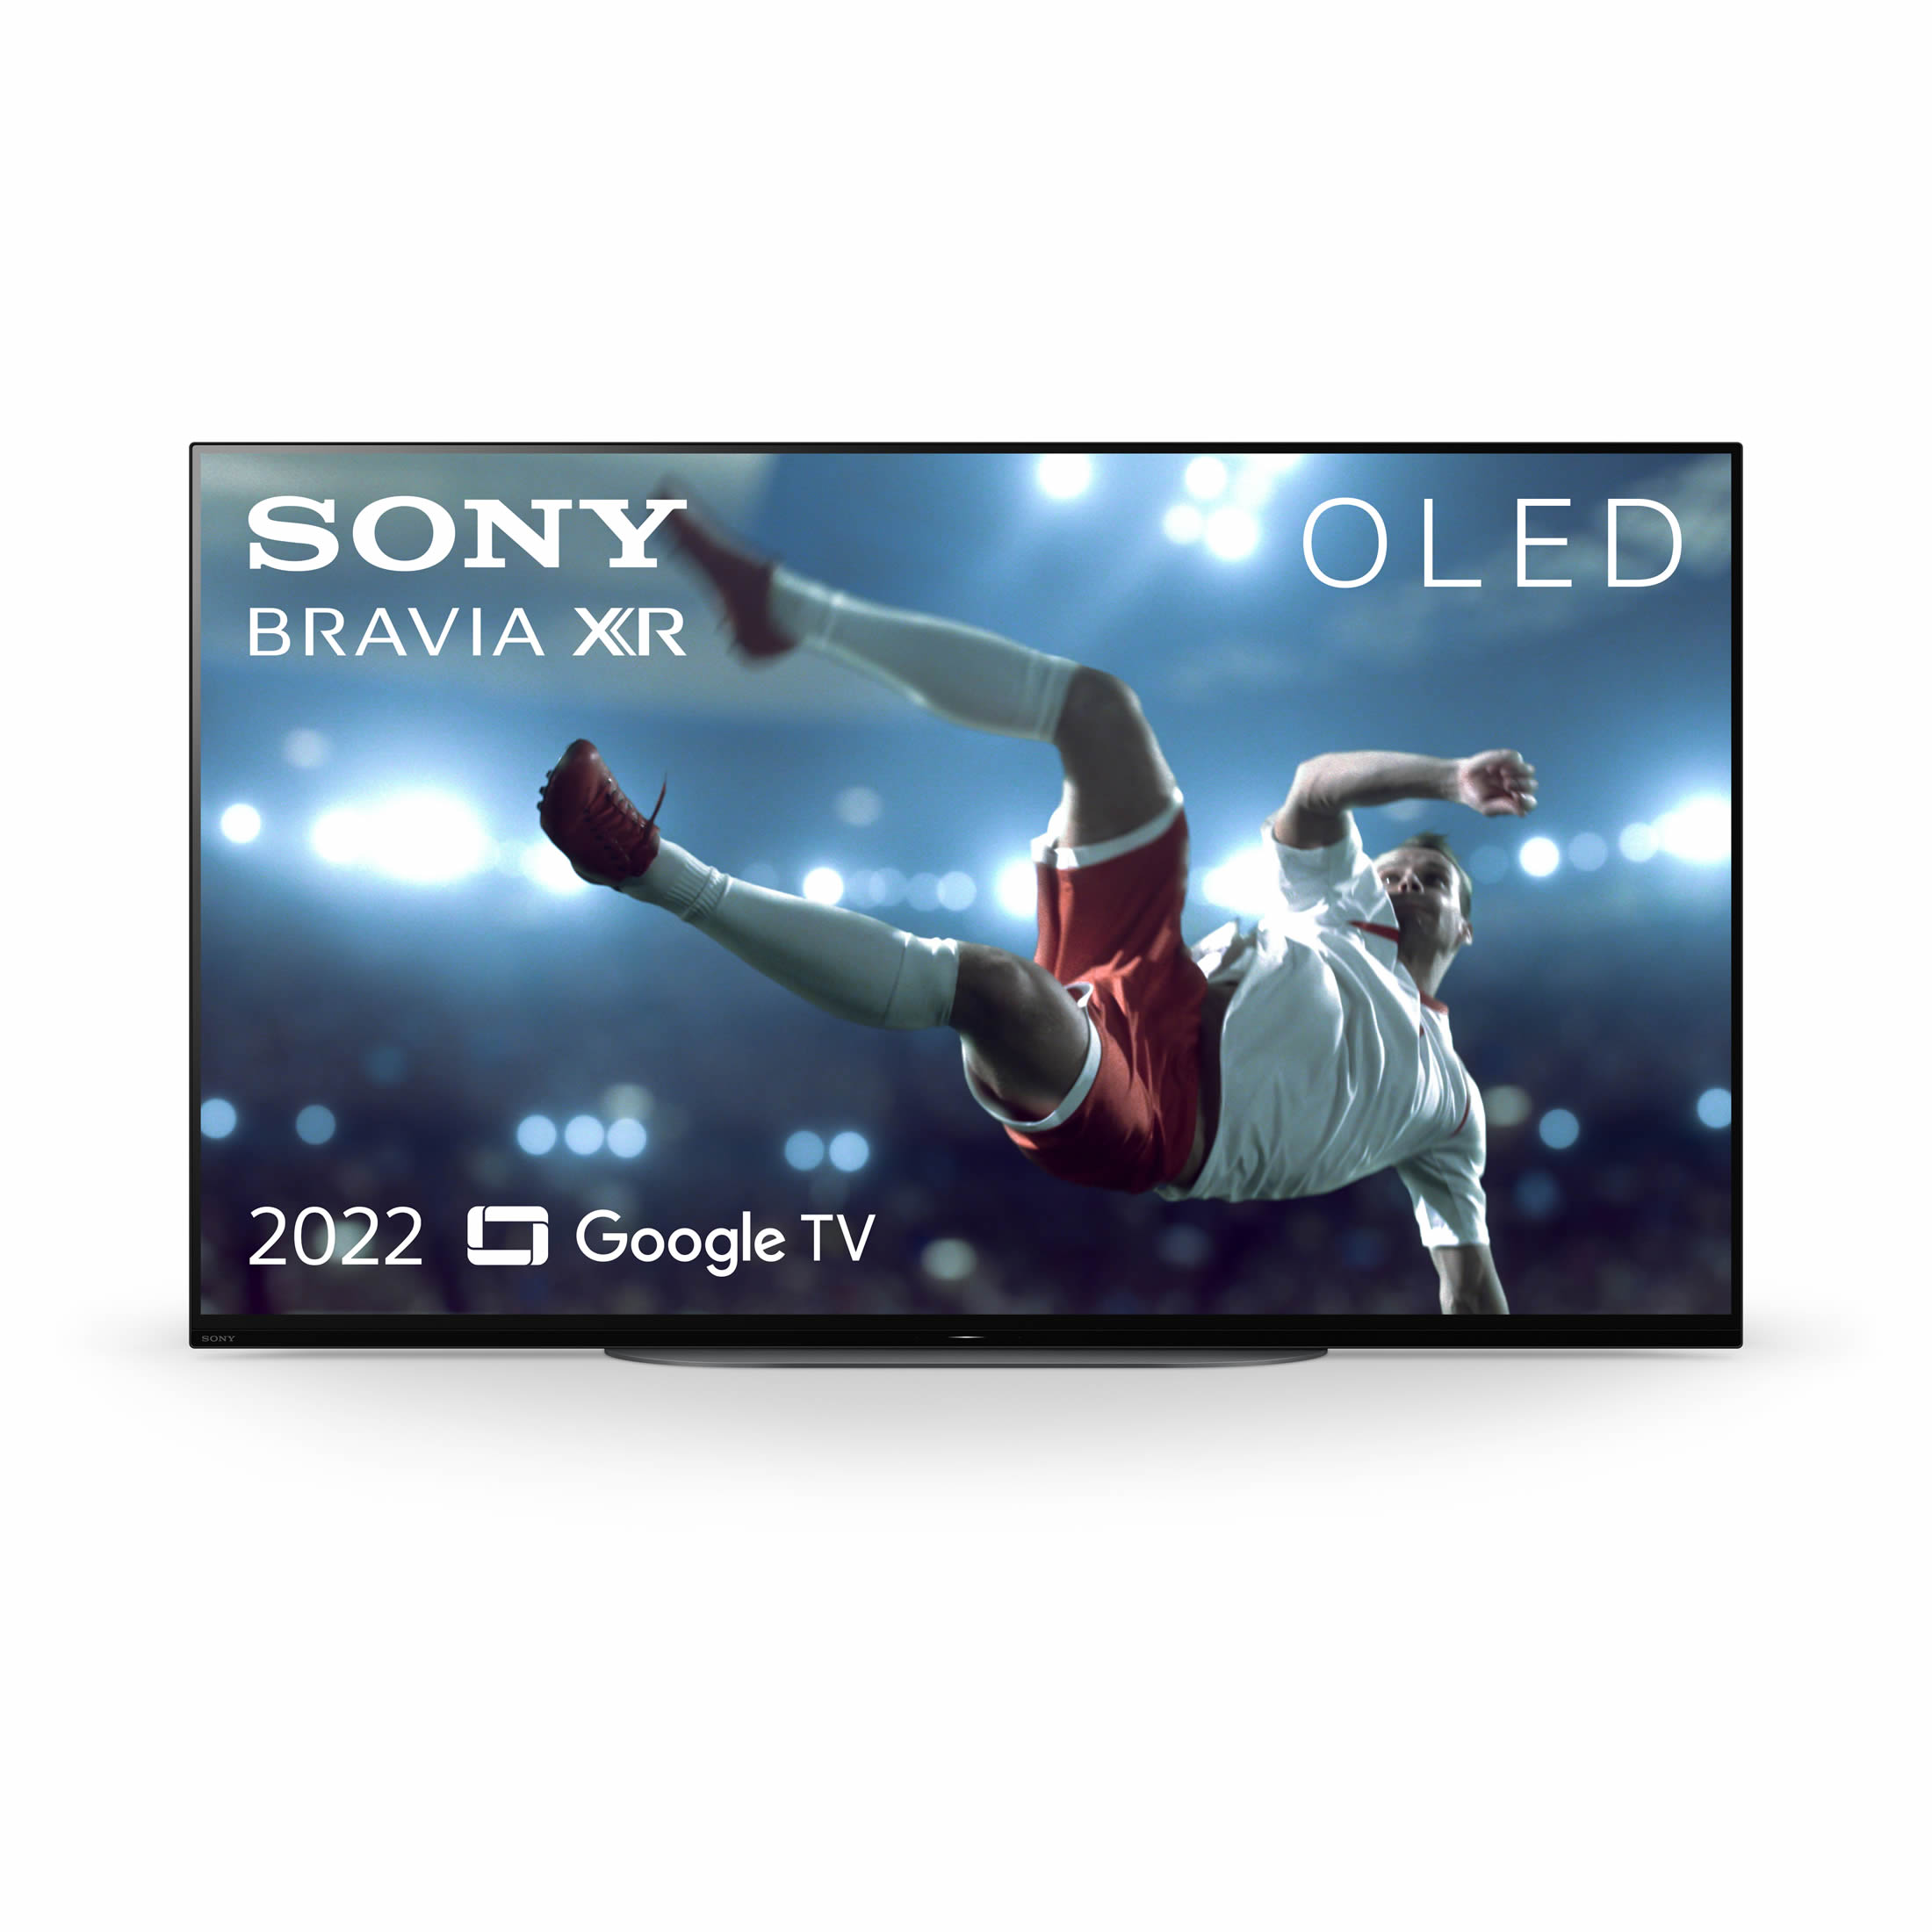 Image of 48" SONY BRAVIA XR-48A90KU Smart 4K Ultra HD HDR OLED TV with Google TV & Assistant, Black